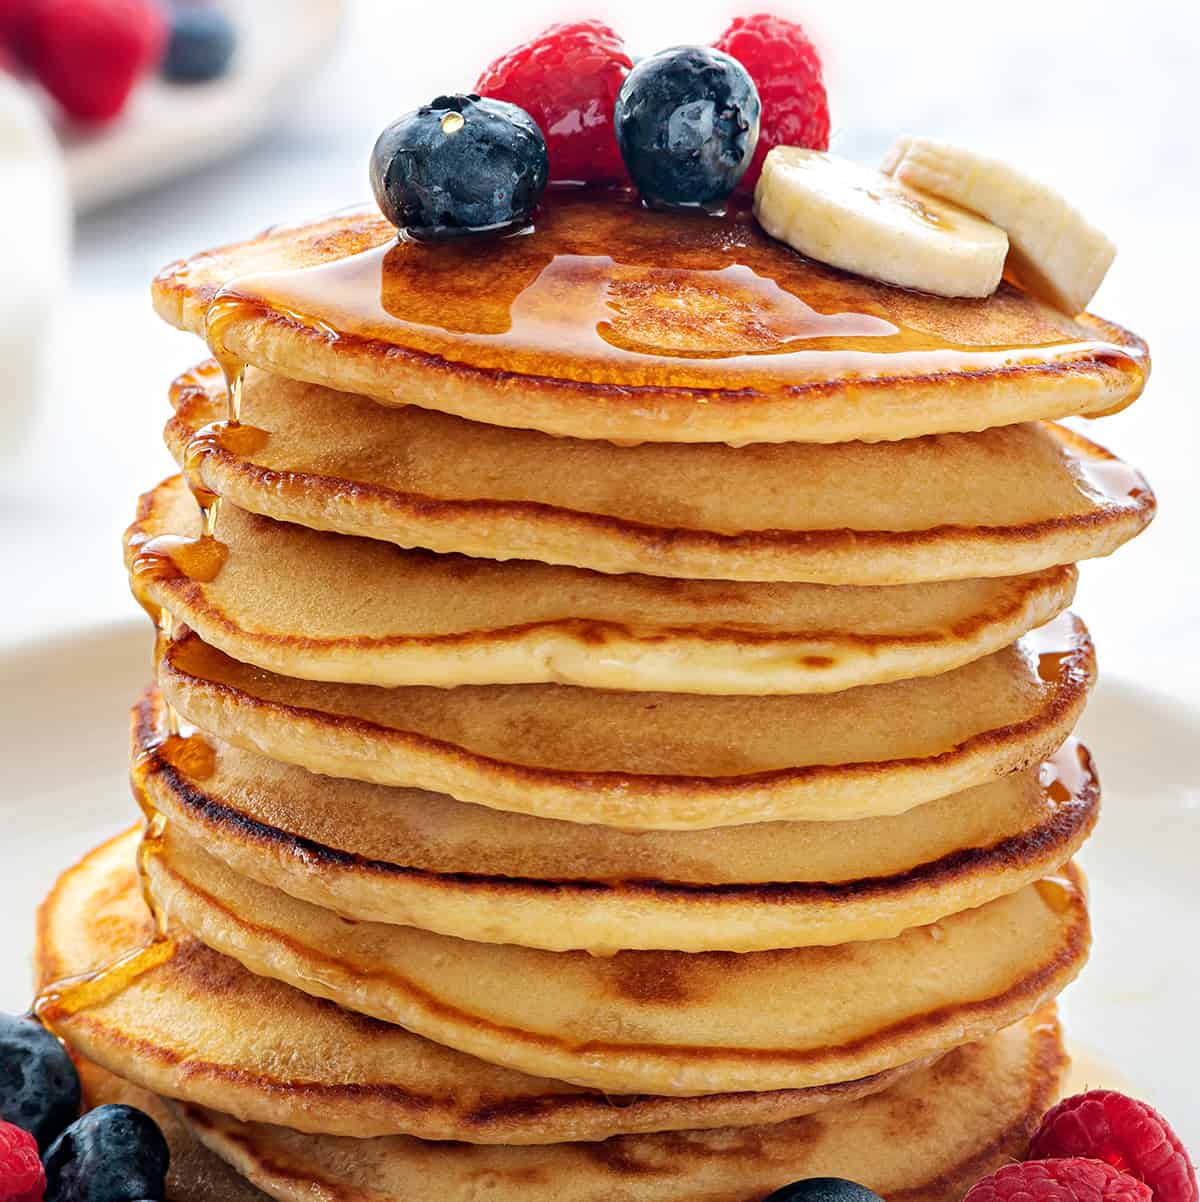 Fluffy pancakes with berries and maple syrup